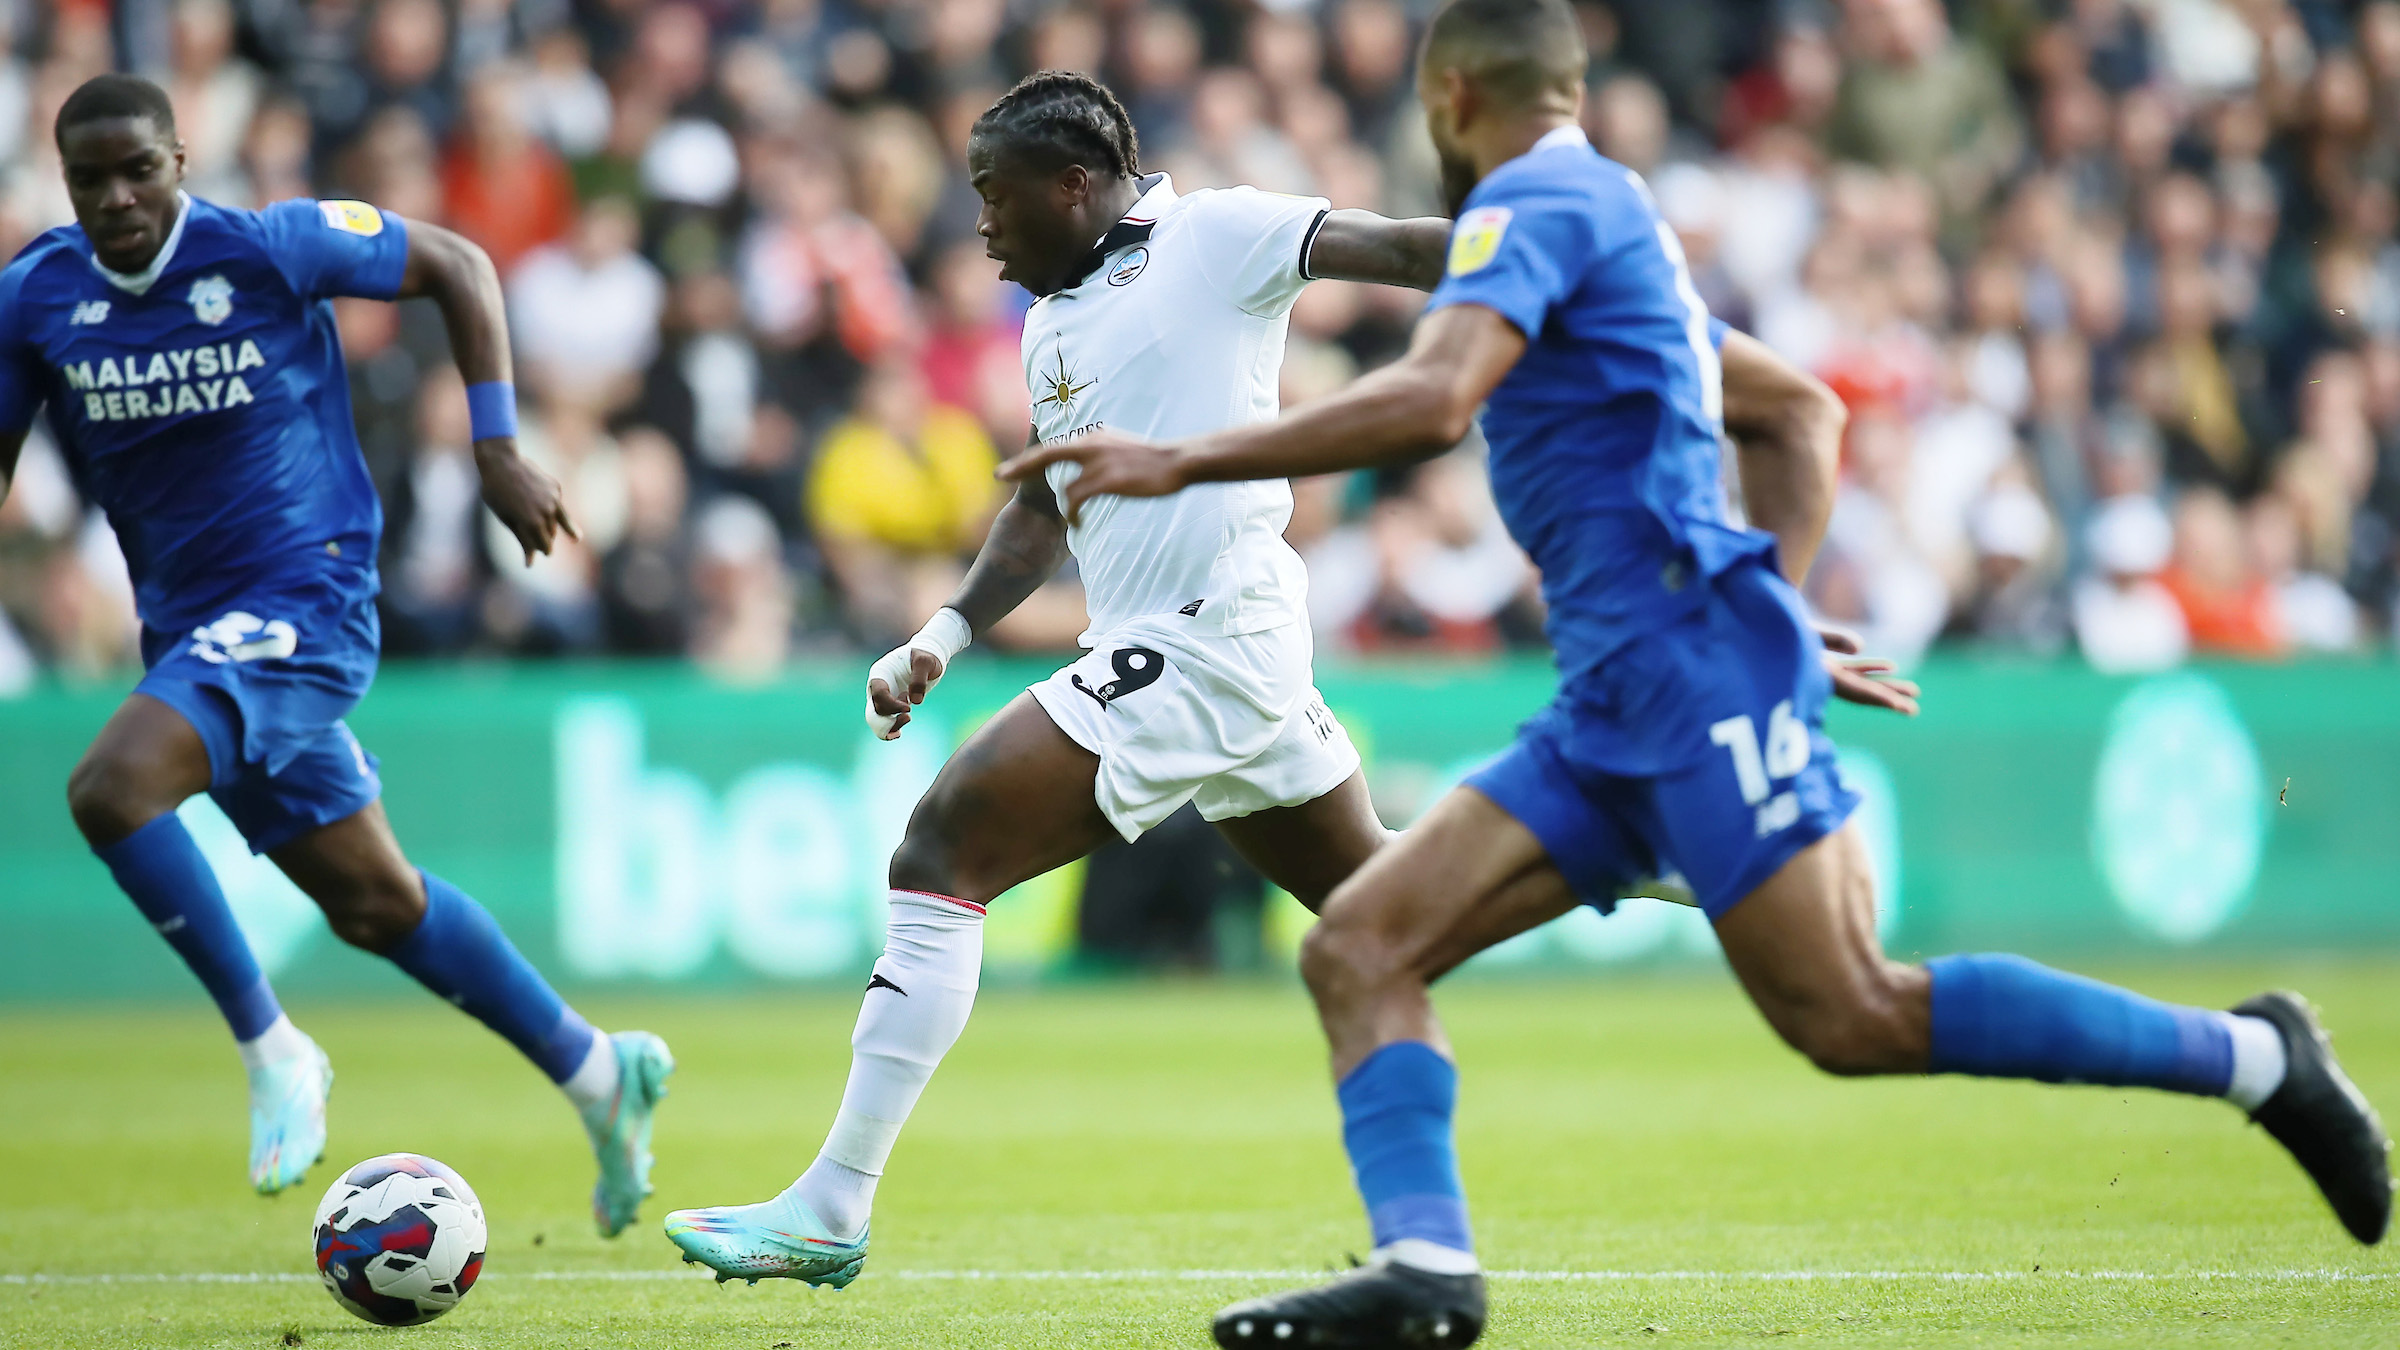 Michael Obafemi runs with the ball against Cardiff